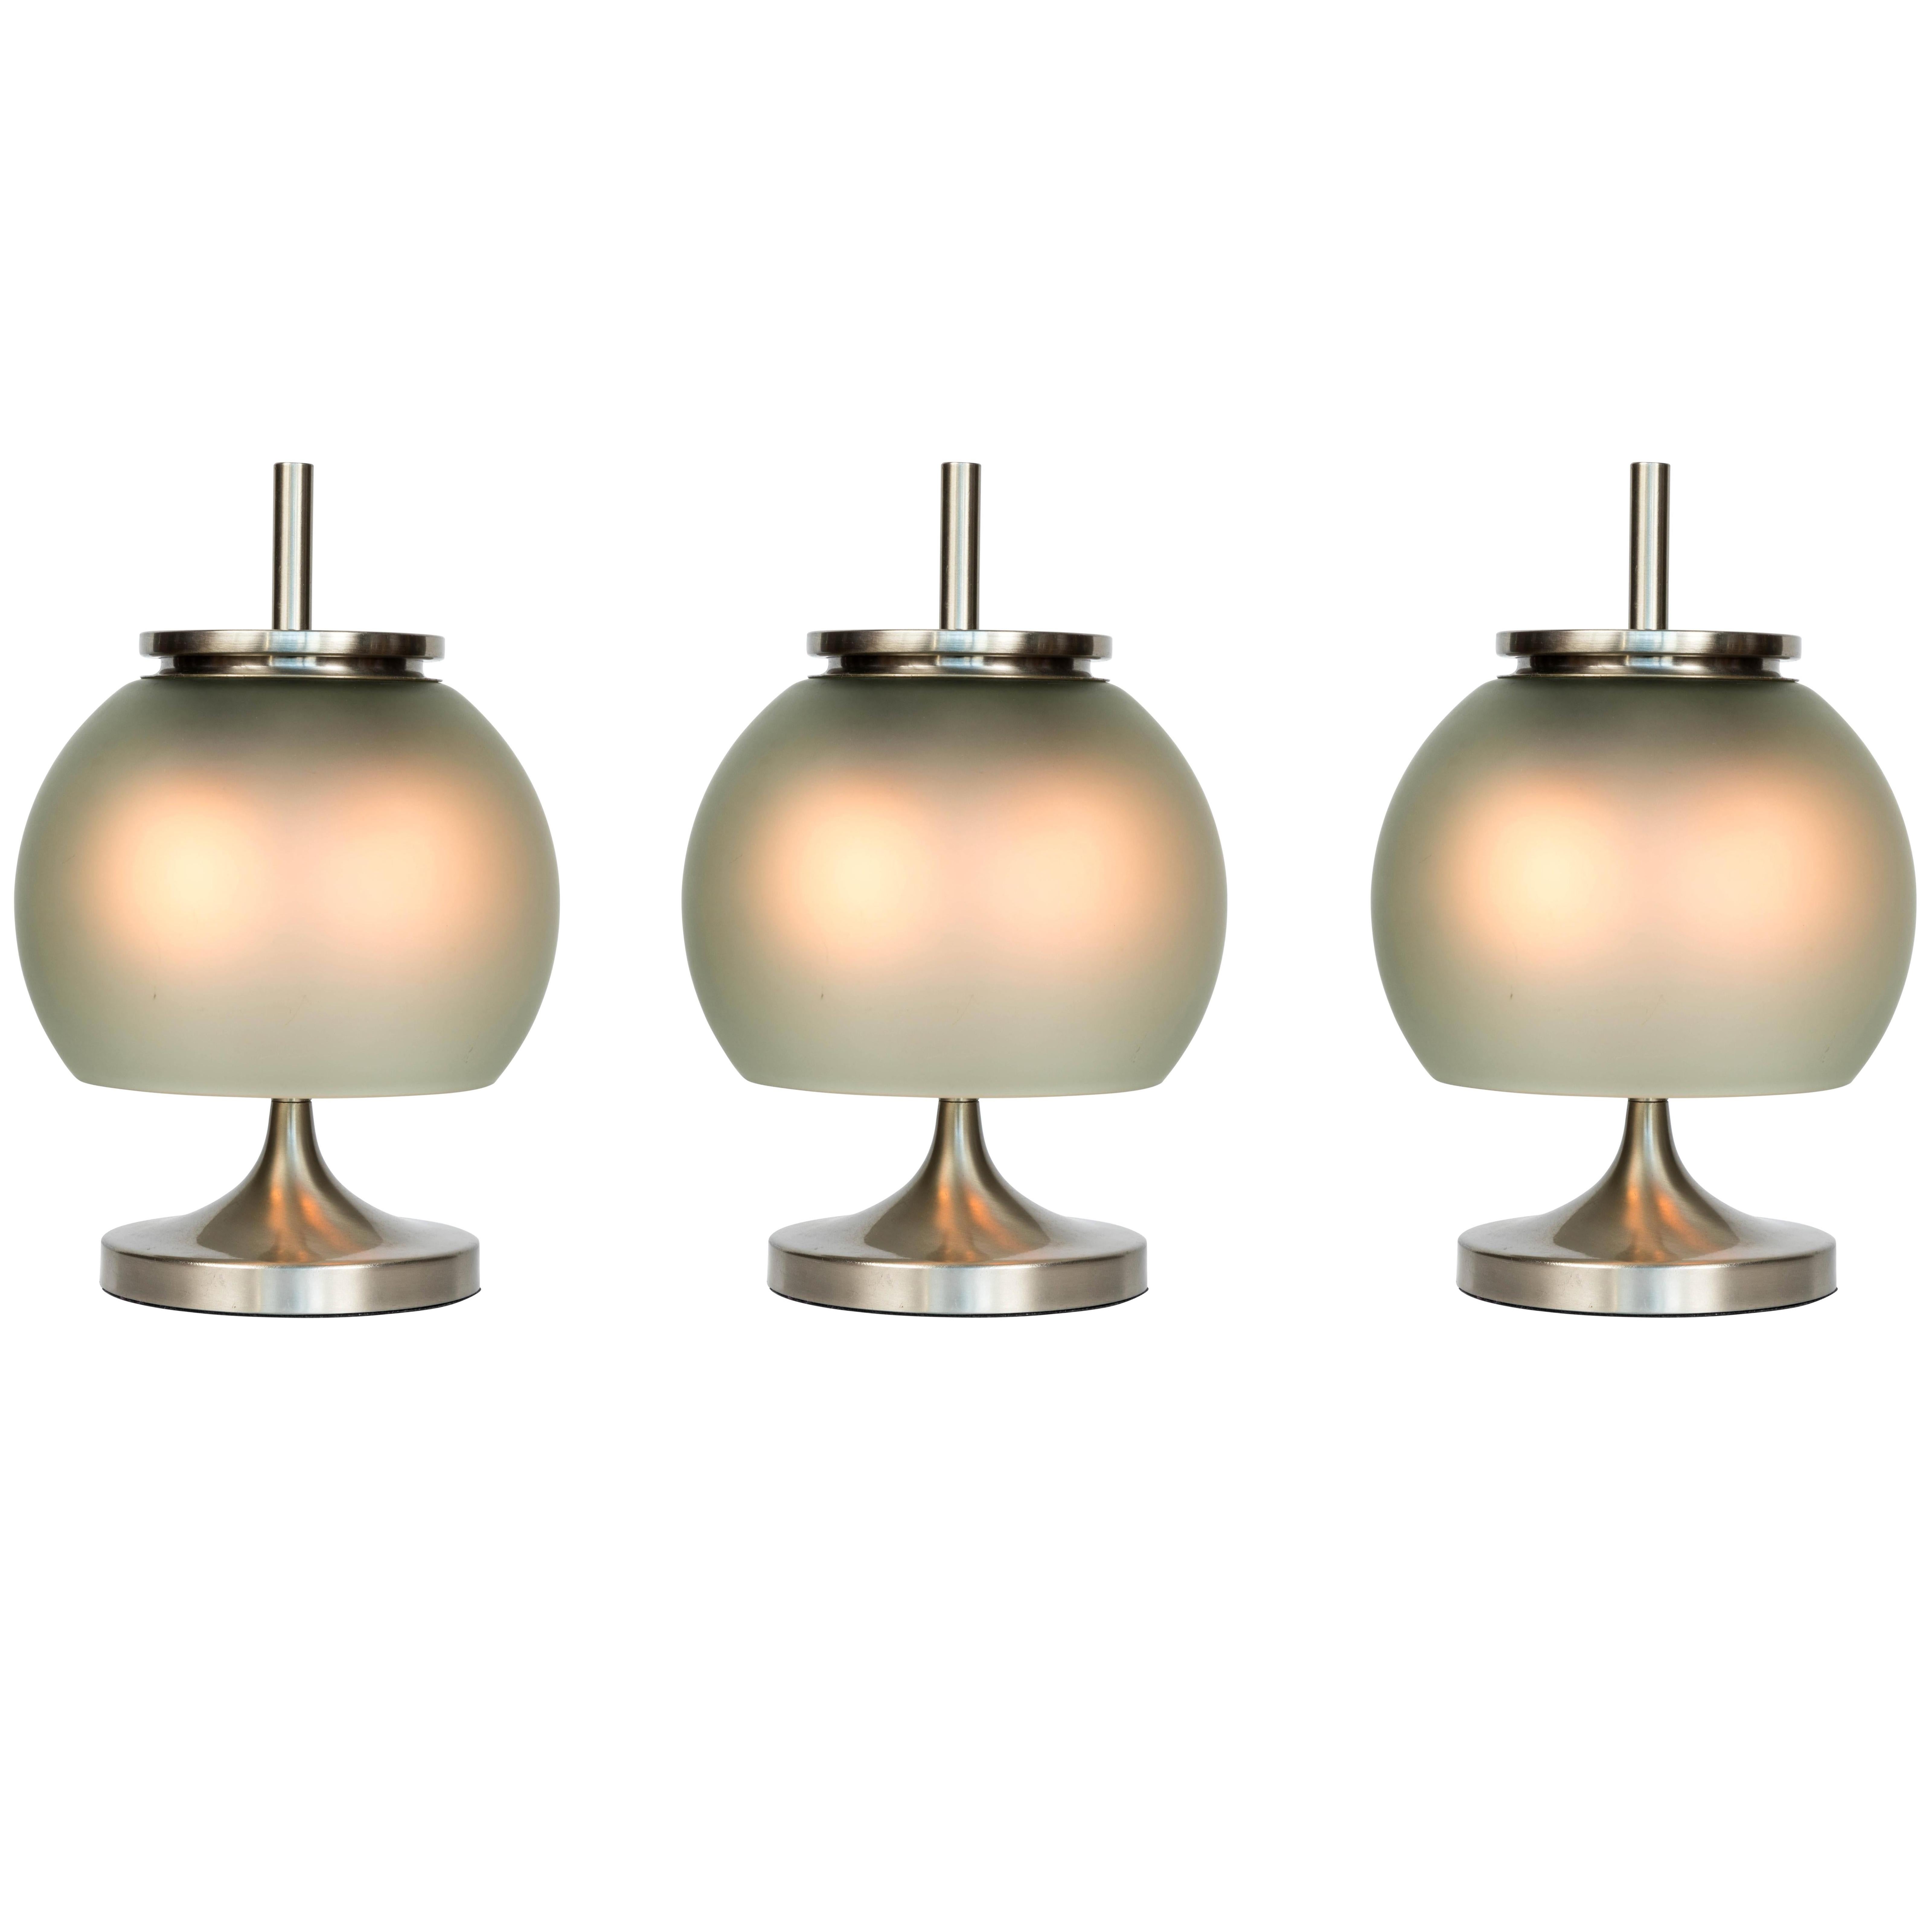 1962 Emma Gismondi Schweinberger 'Chi' Table Lamps for Artemide. This uniquely elegant table lamp is produced in nickeled brass and hand blown green opaline glass. An highly refined and iconic midcentury design that is quintessentially Italian. Two